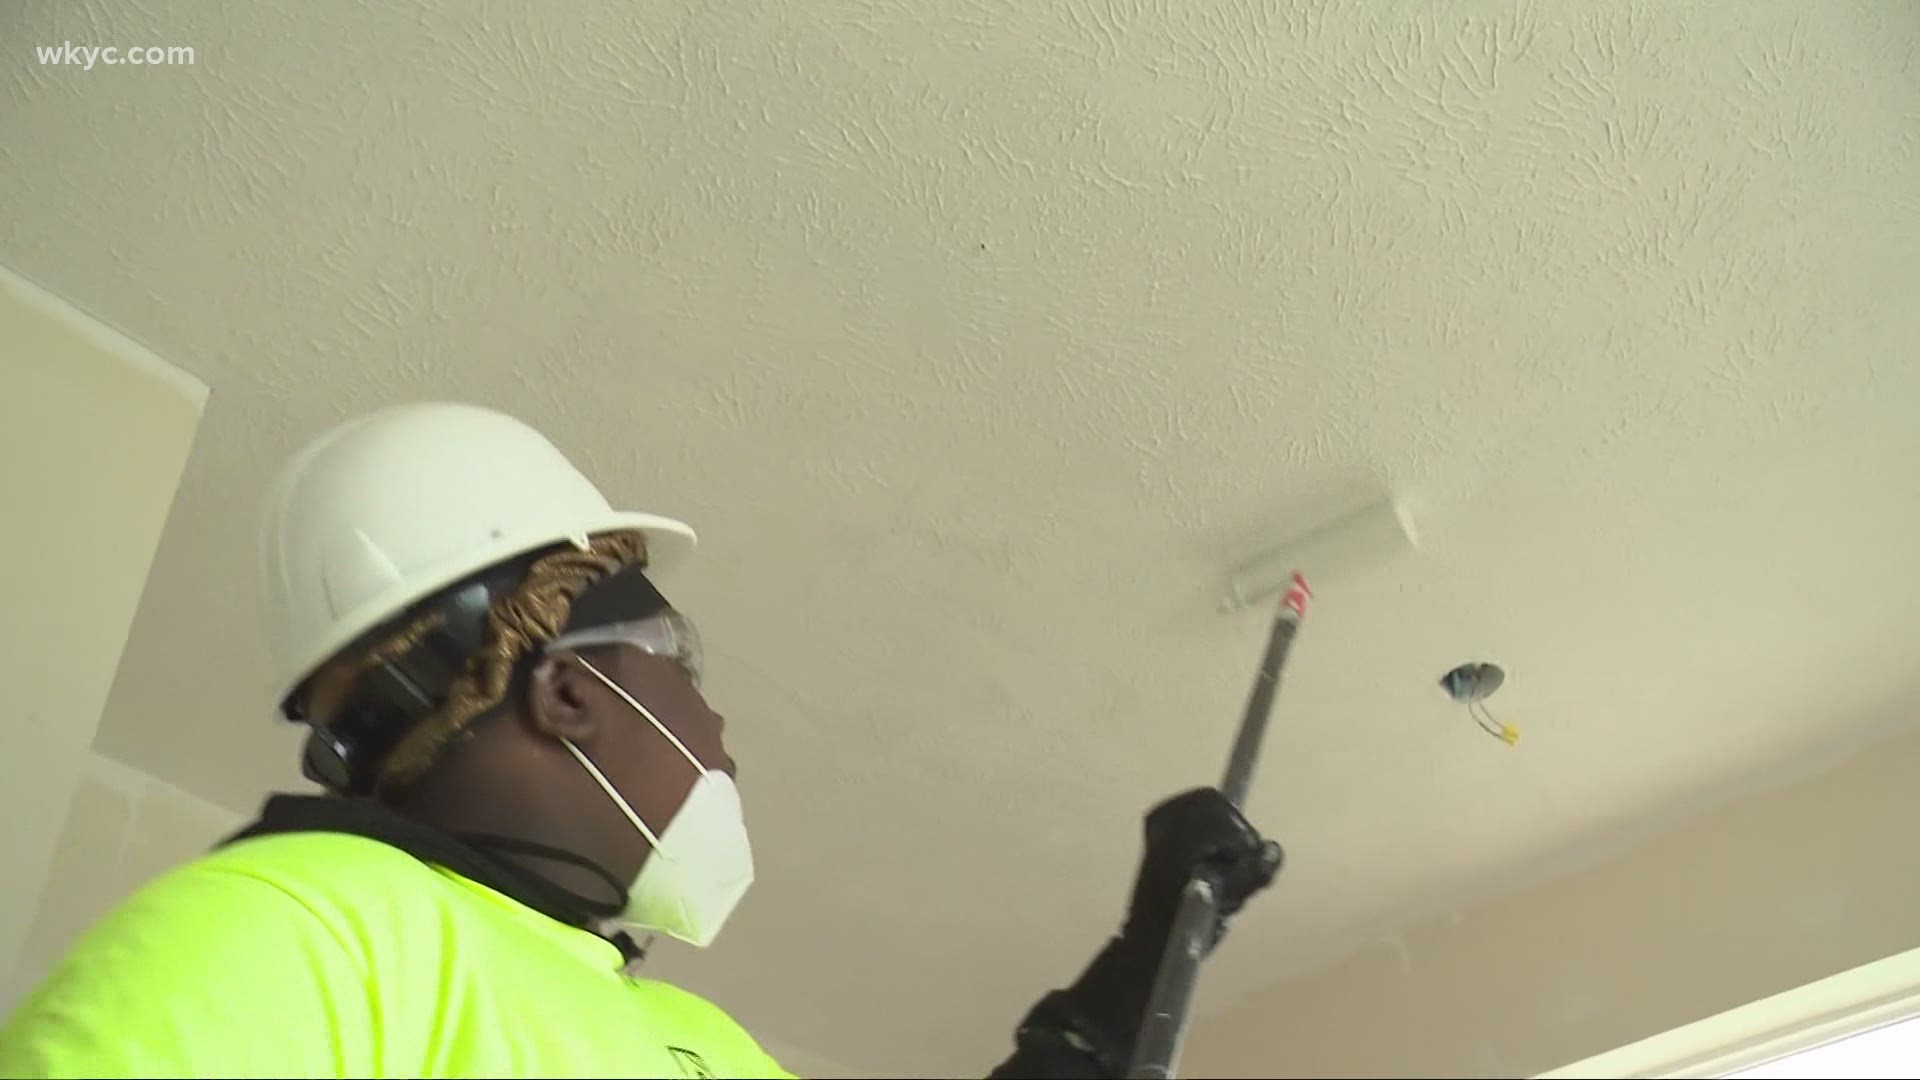 Local teens helping to fix up homes and learning some key skills in the process. Romney Smith tells us about it.